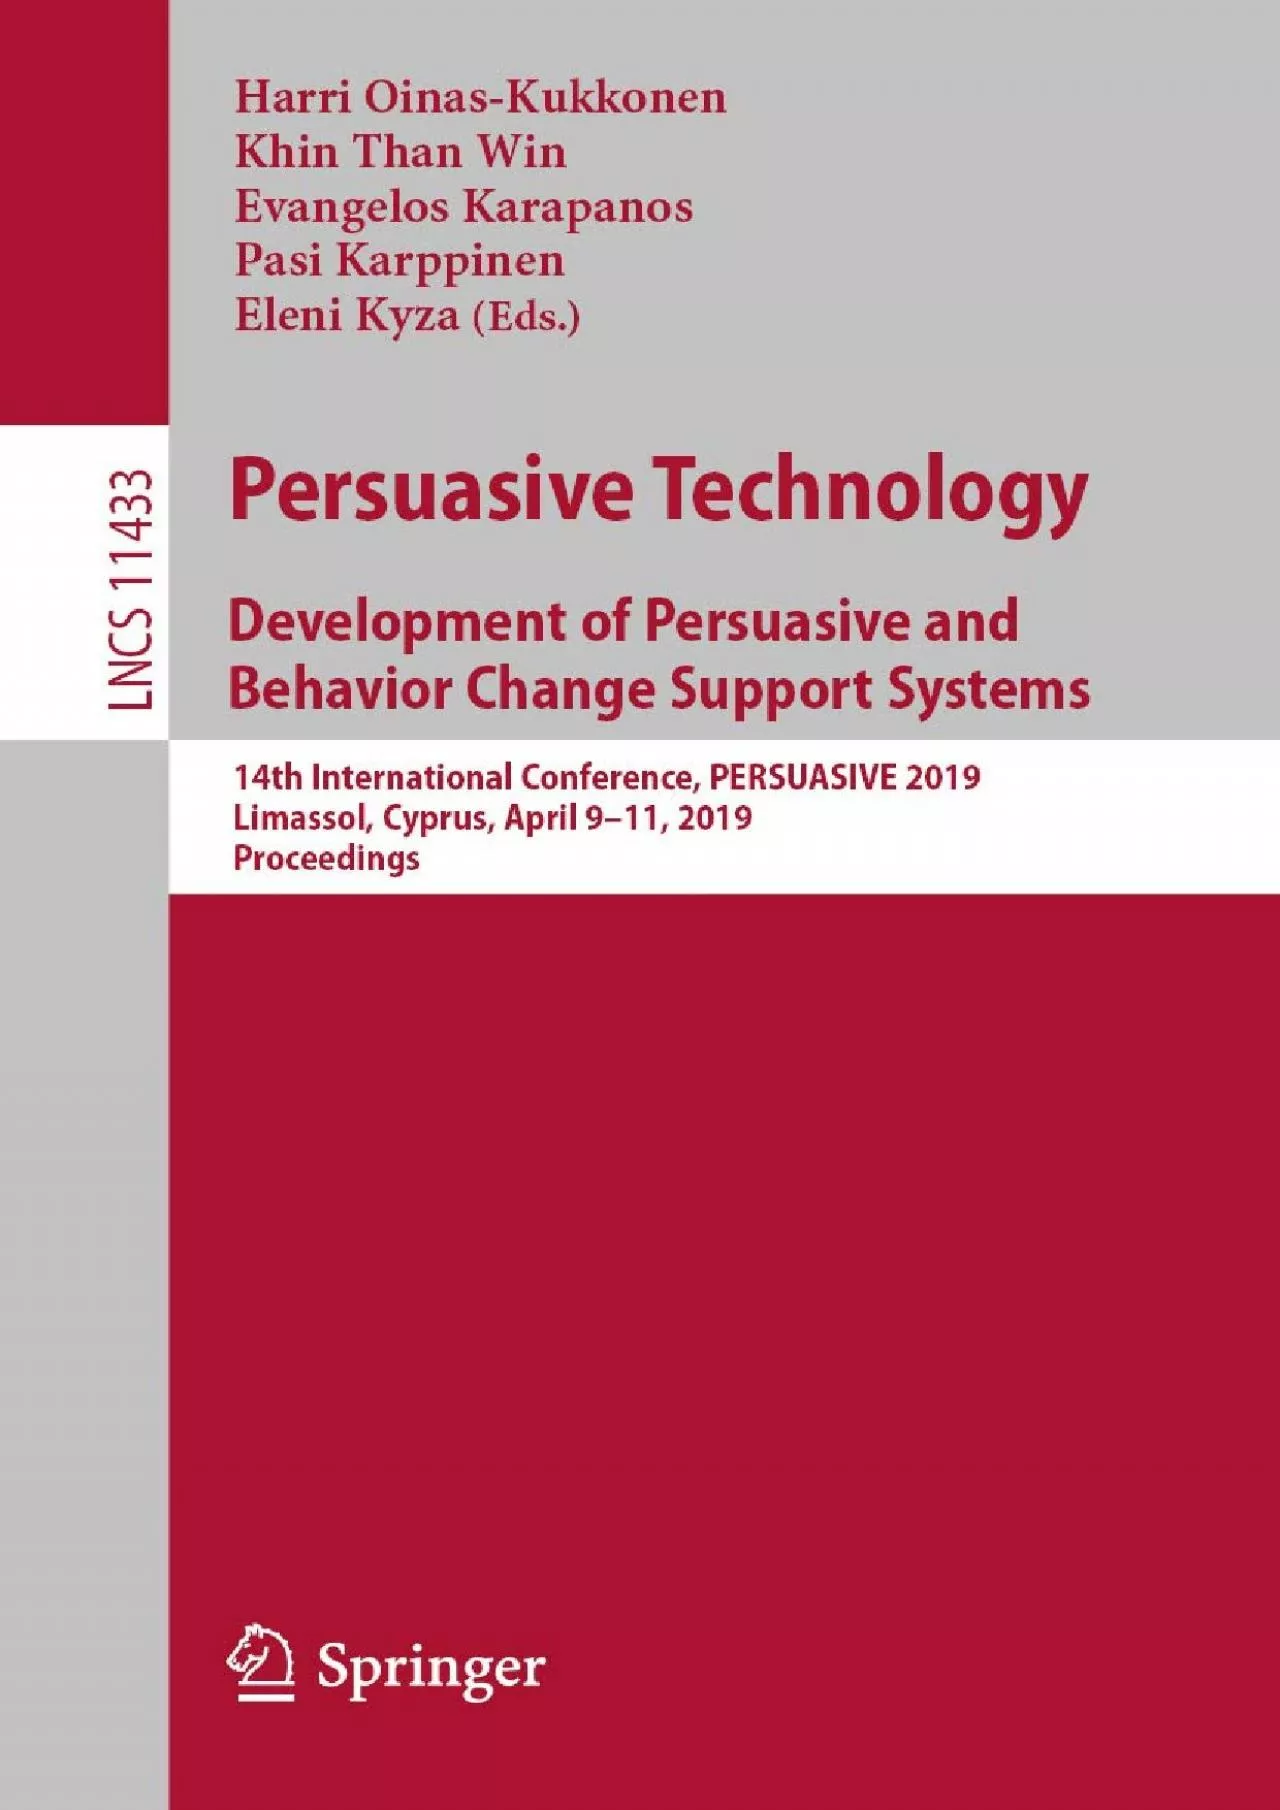 (BOOK)-Persuasive Technology Development of Persuasive and Behavior Change Support Systems